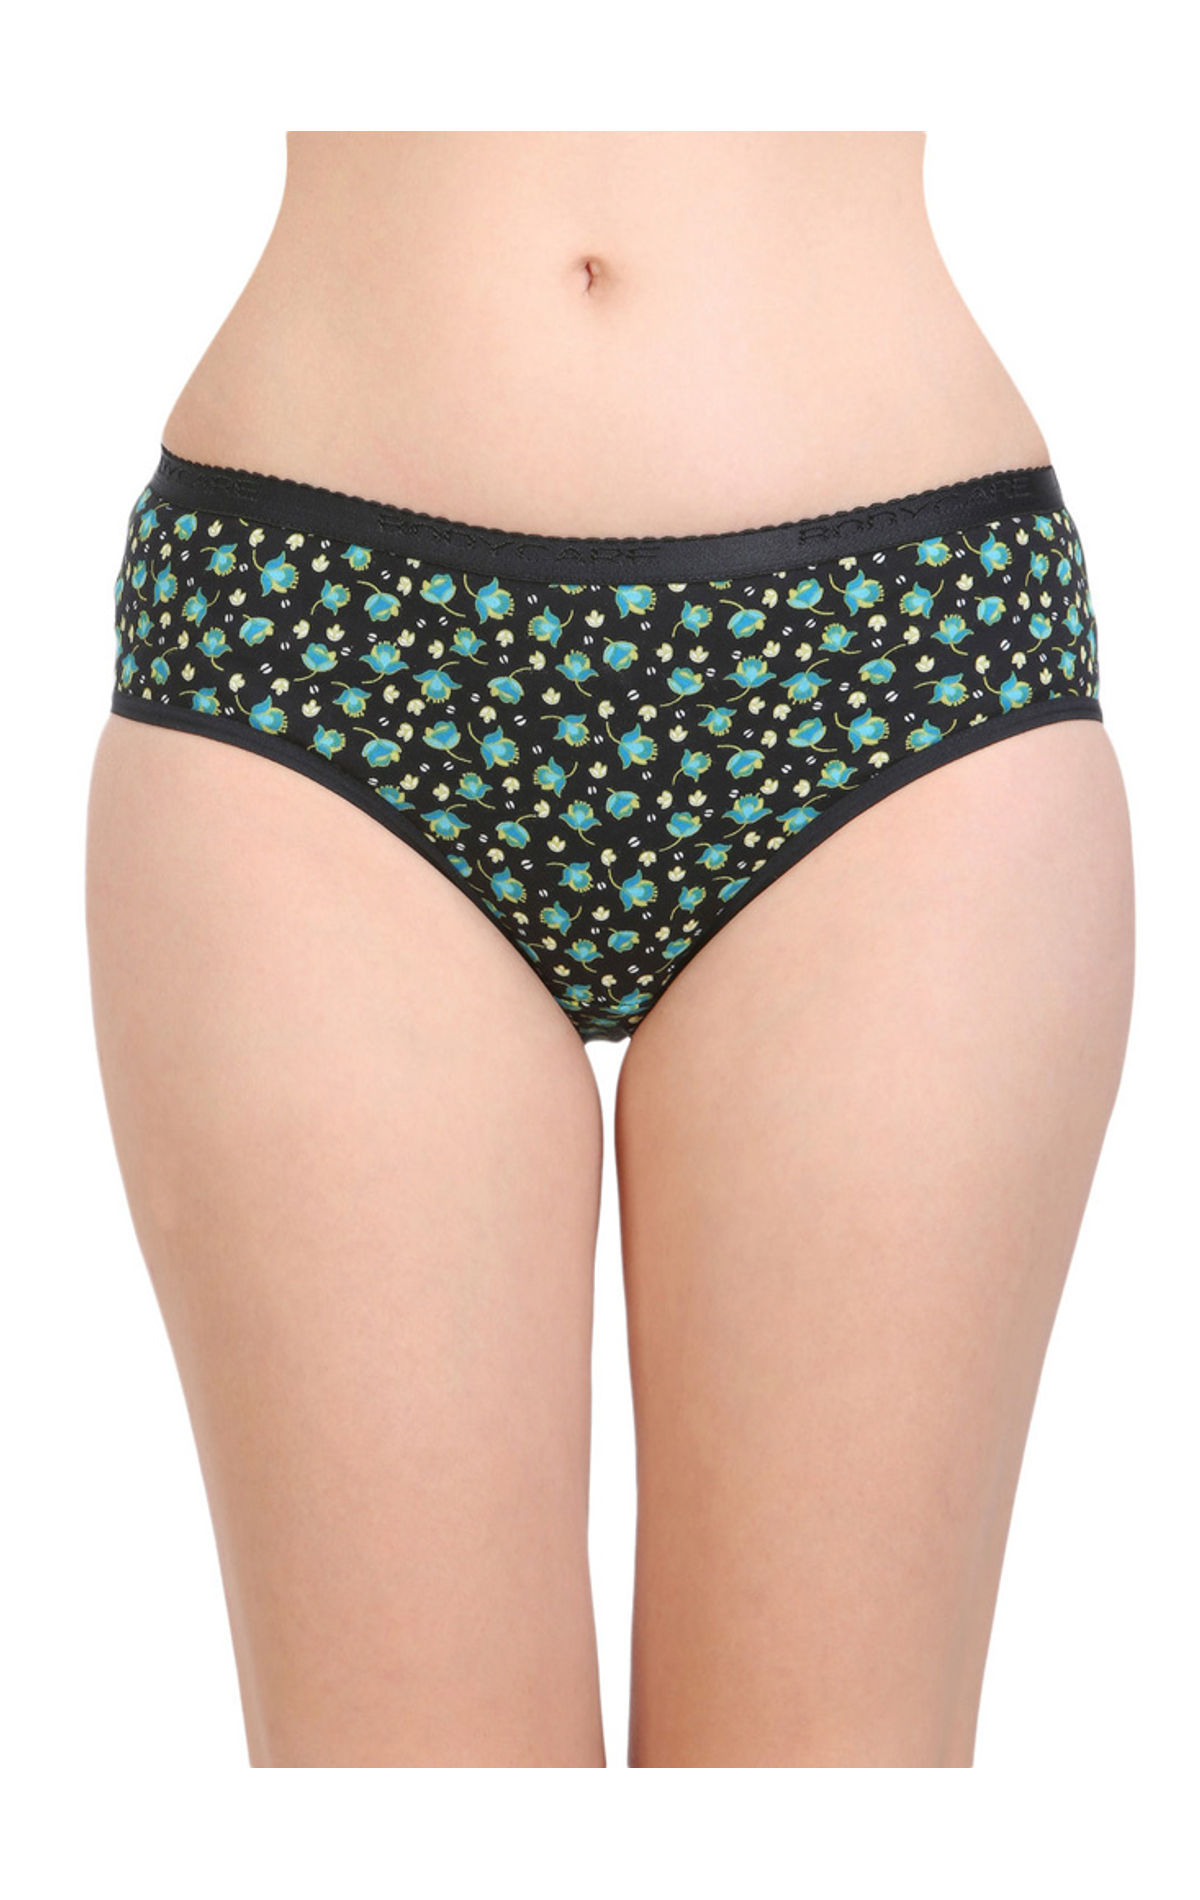 Bodycare Pack Of 3 Premium Printed Hipster Briefs In Assorted Color-6640, 6640-3pcs